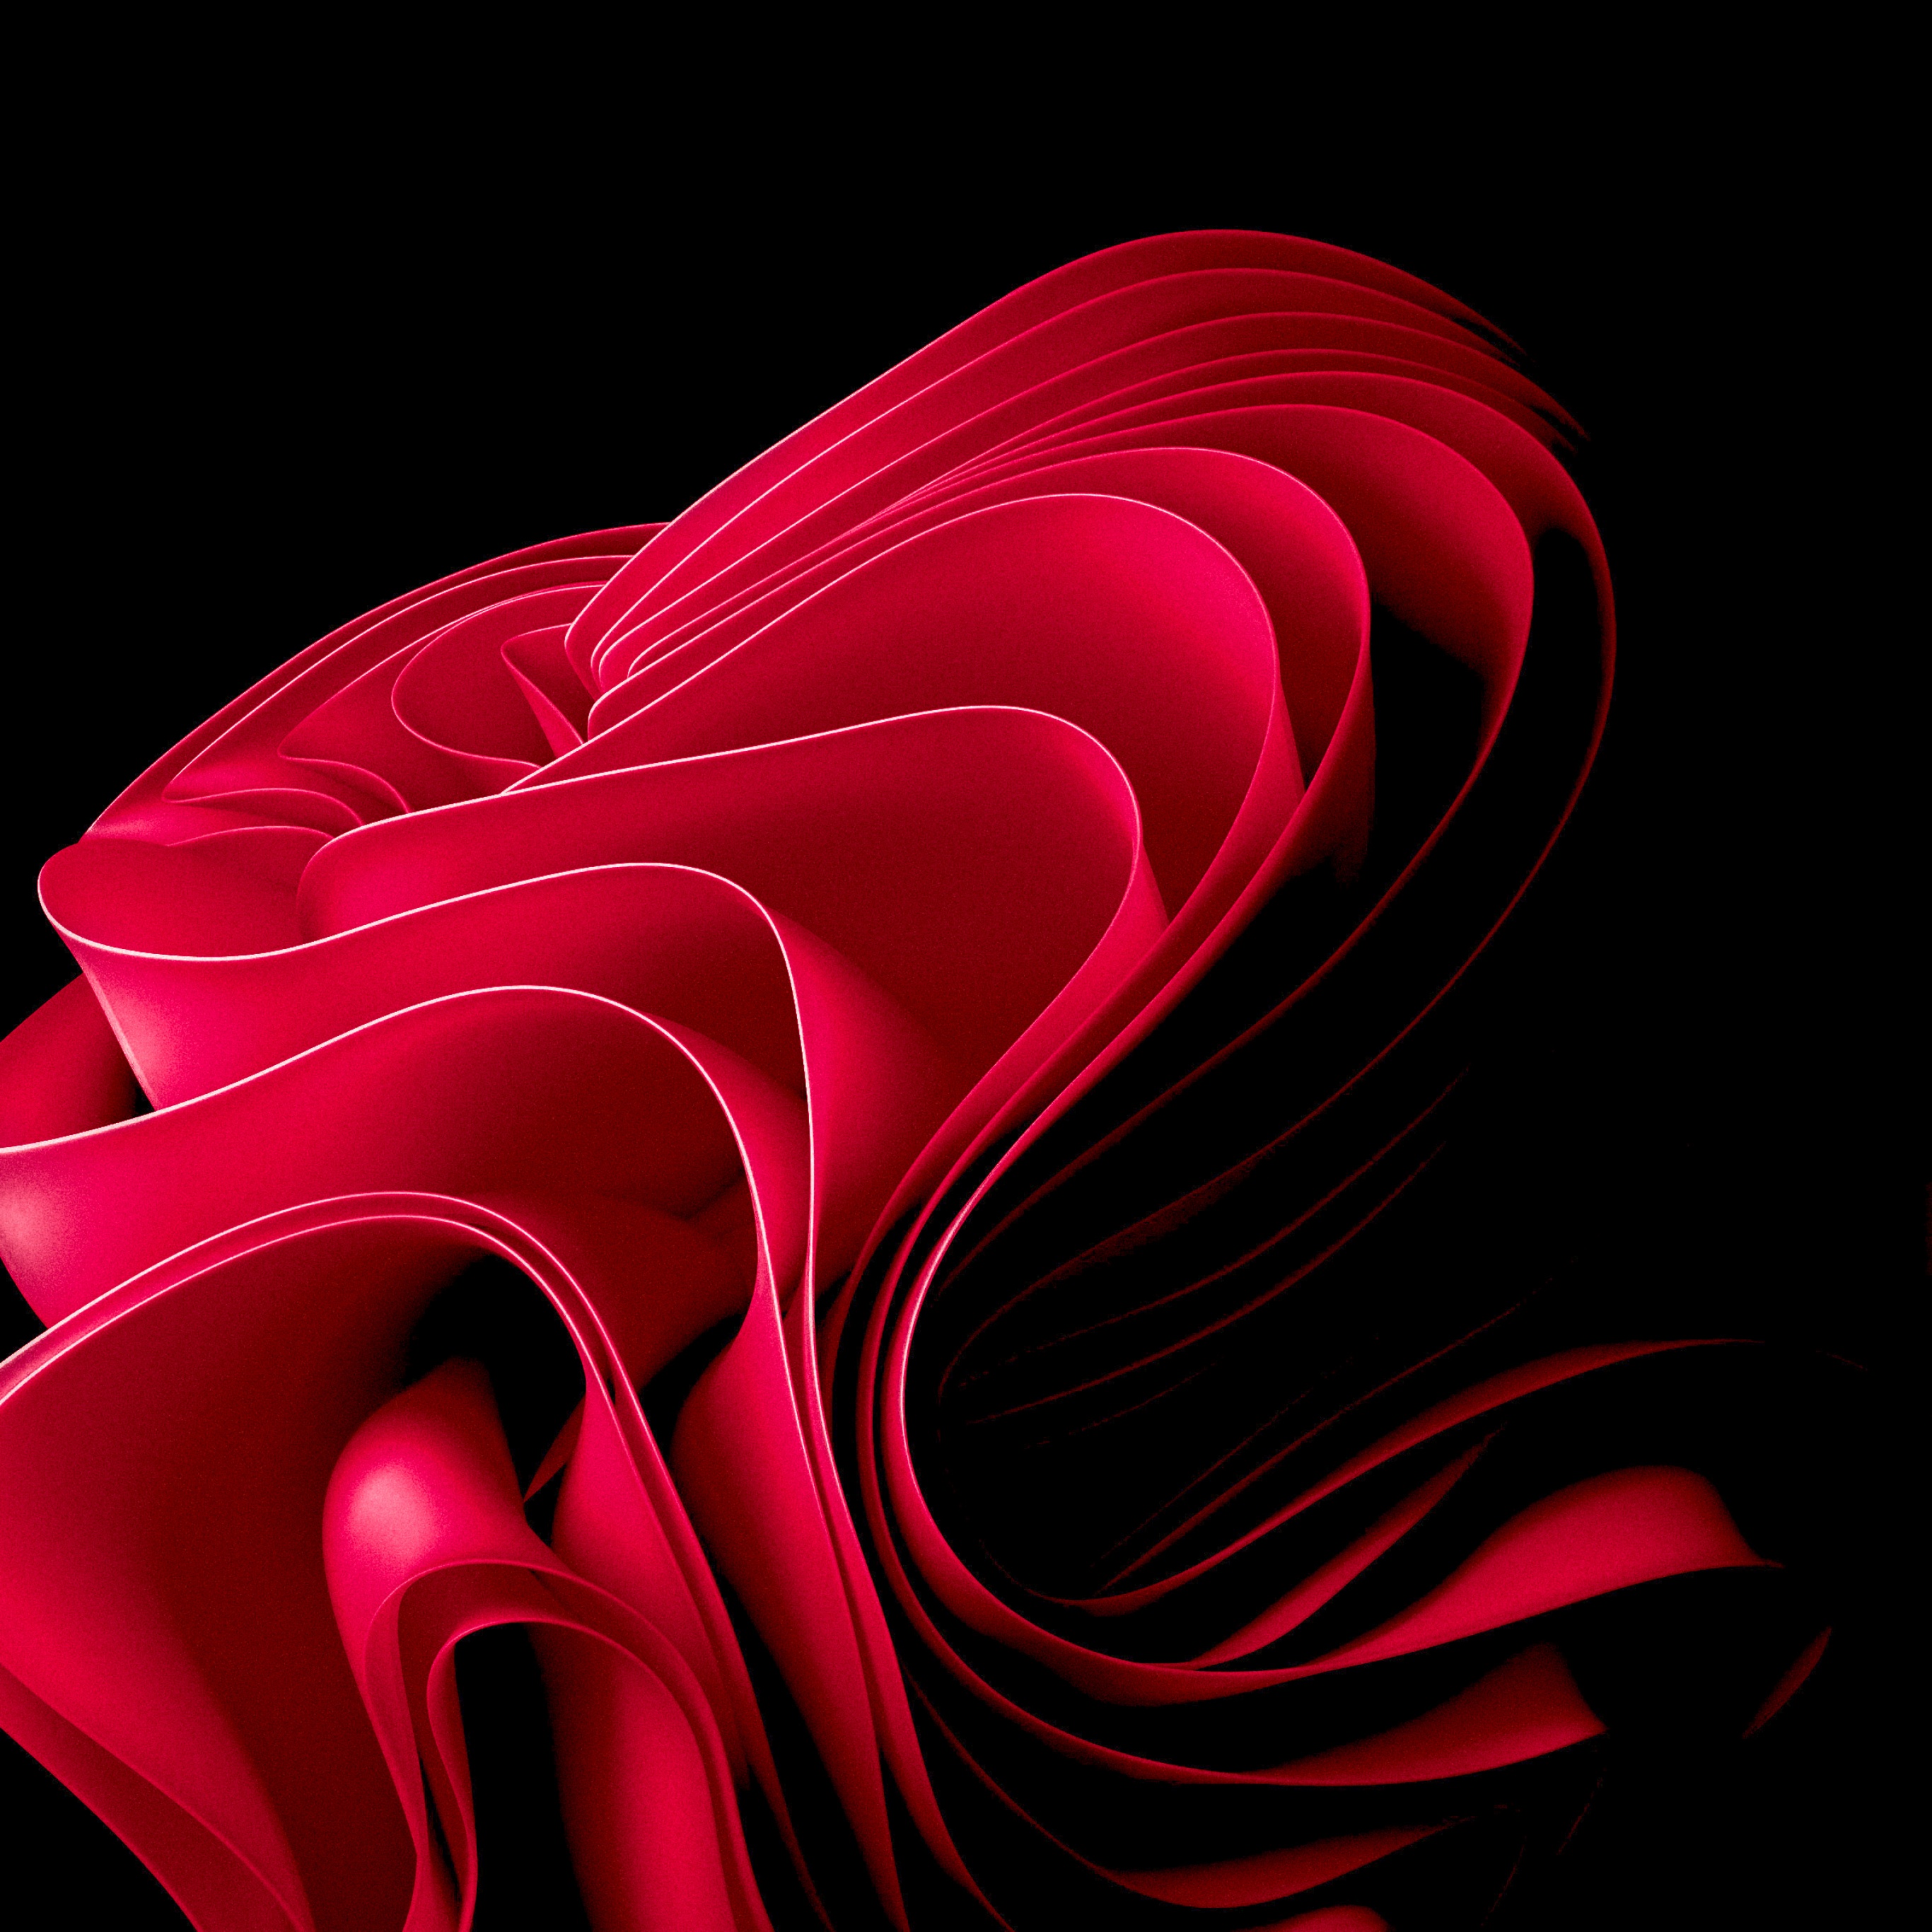 Windows 11 Wallpaper 4K, Stock, Red abstract, #9058